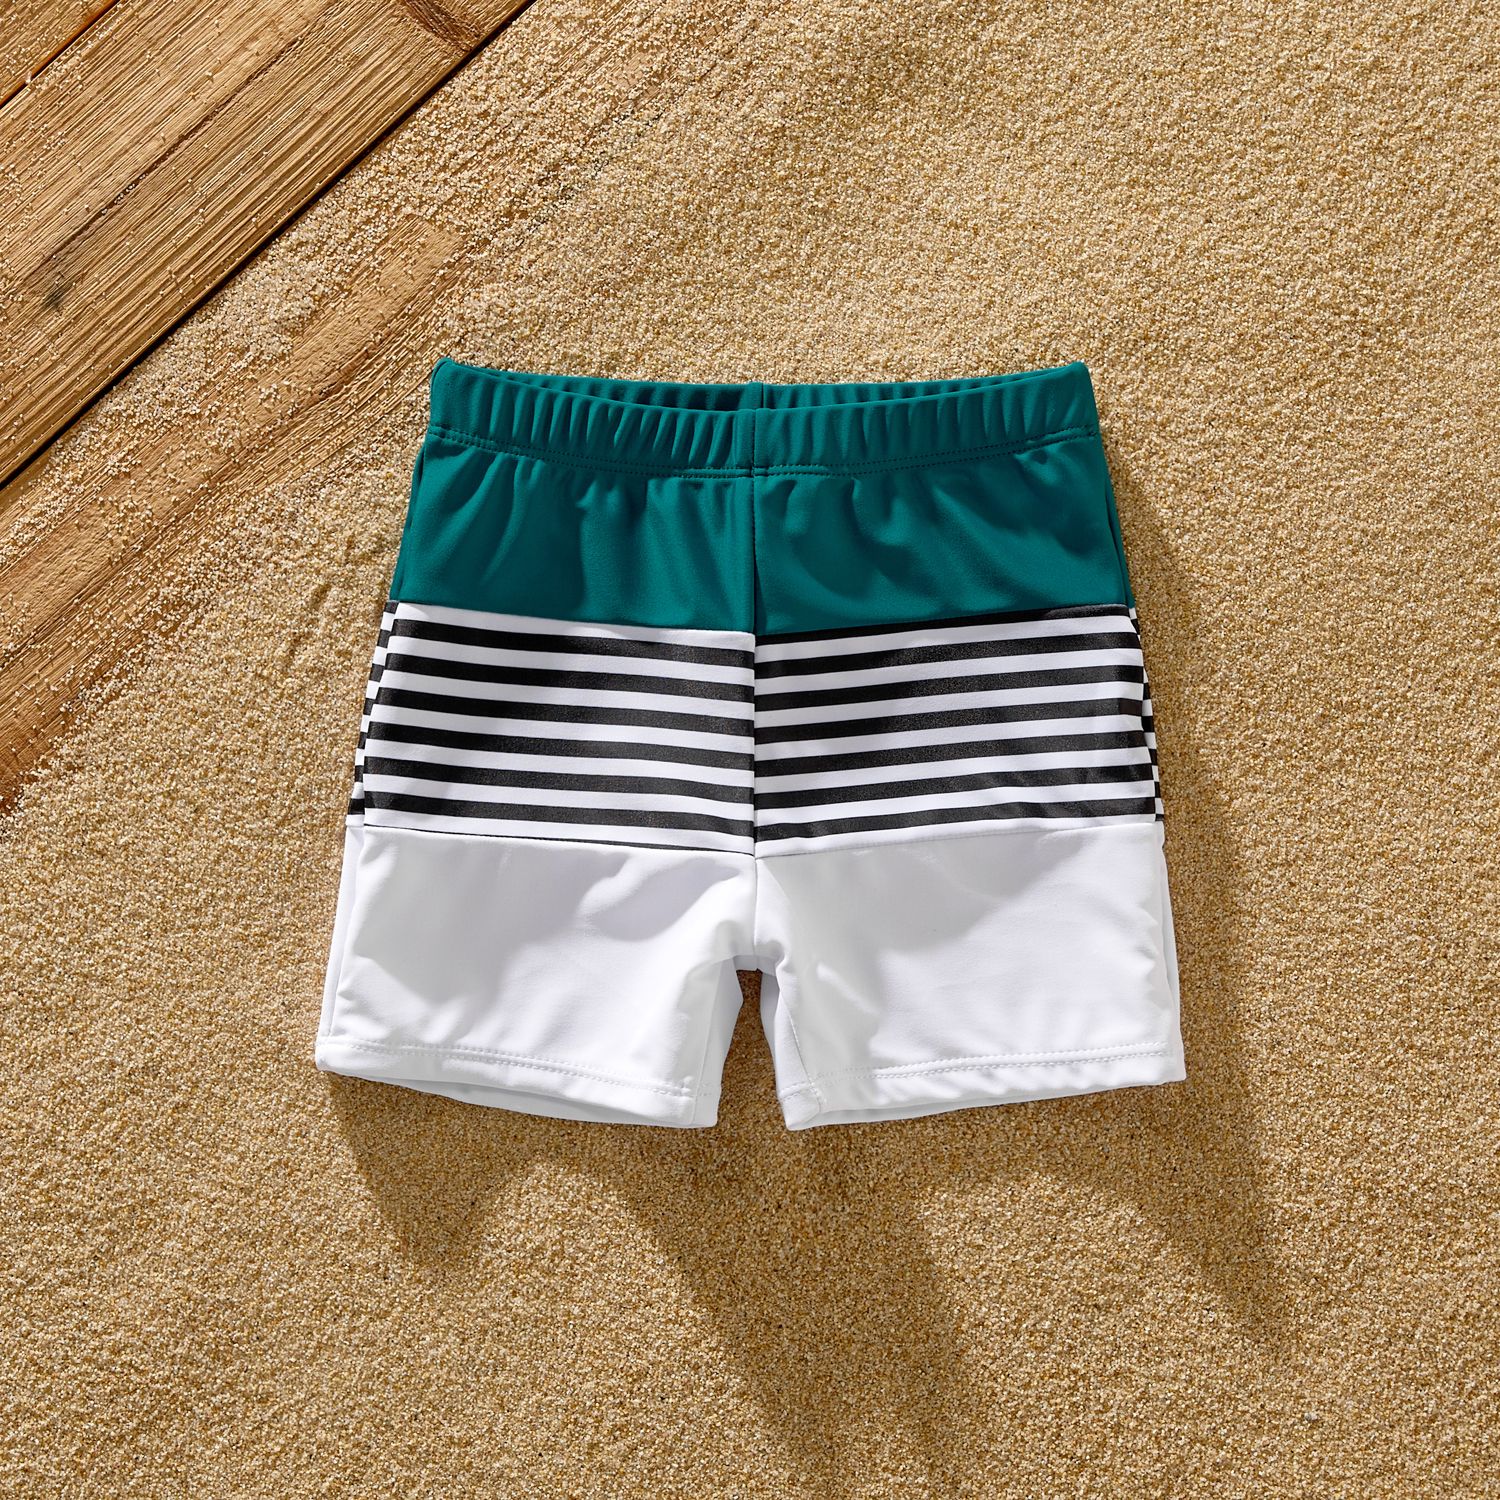 Family Matching Colorblock One Shoulder Cut Out One-piece Swimsuit And Striped Spliced Swim Trunks Shorts